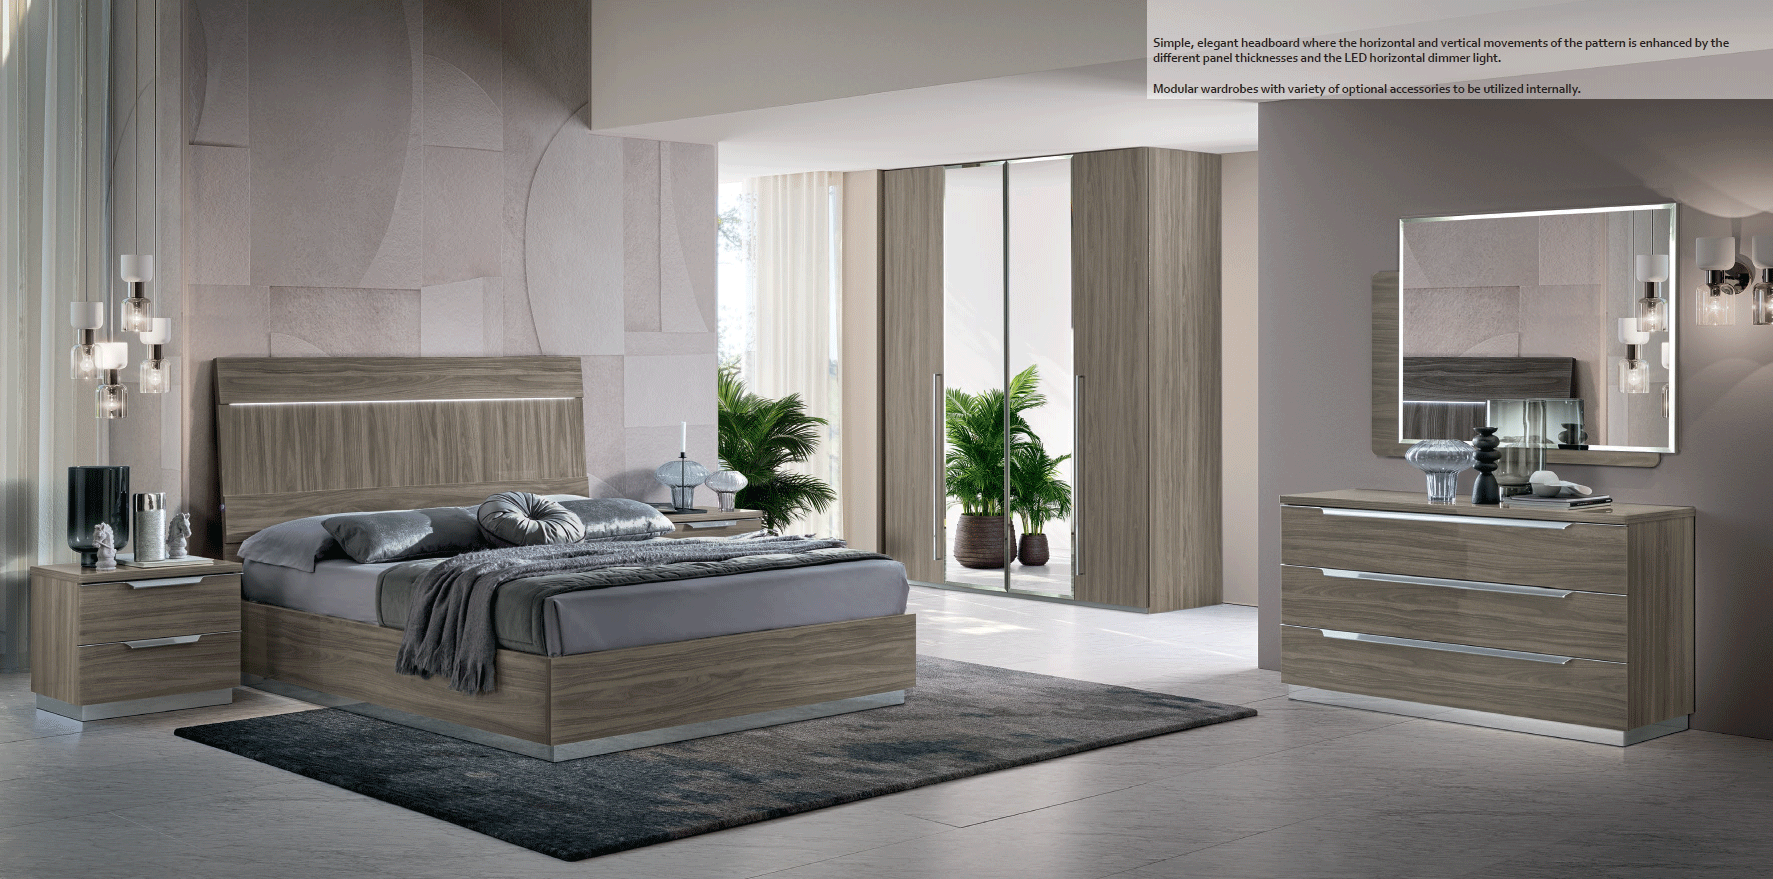 Wallunits Hallway Console tables and Mirrors Kroma Bedroom GREY Additional Items